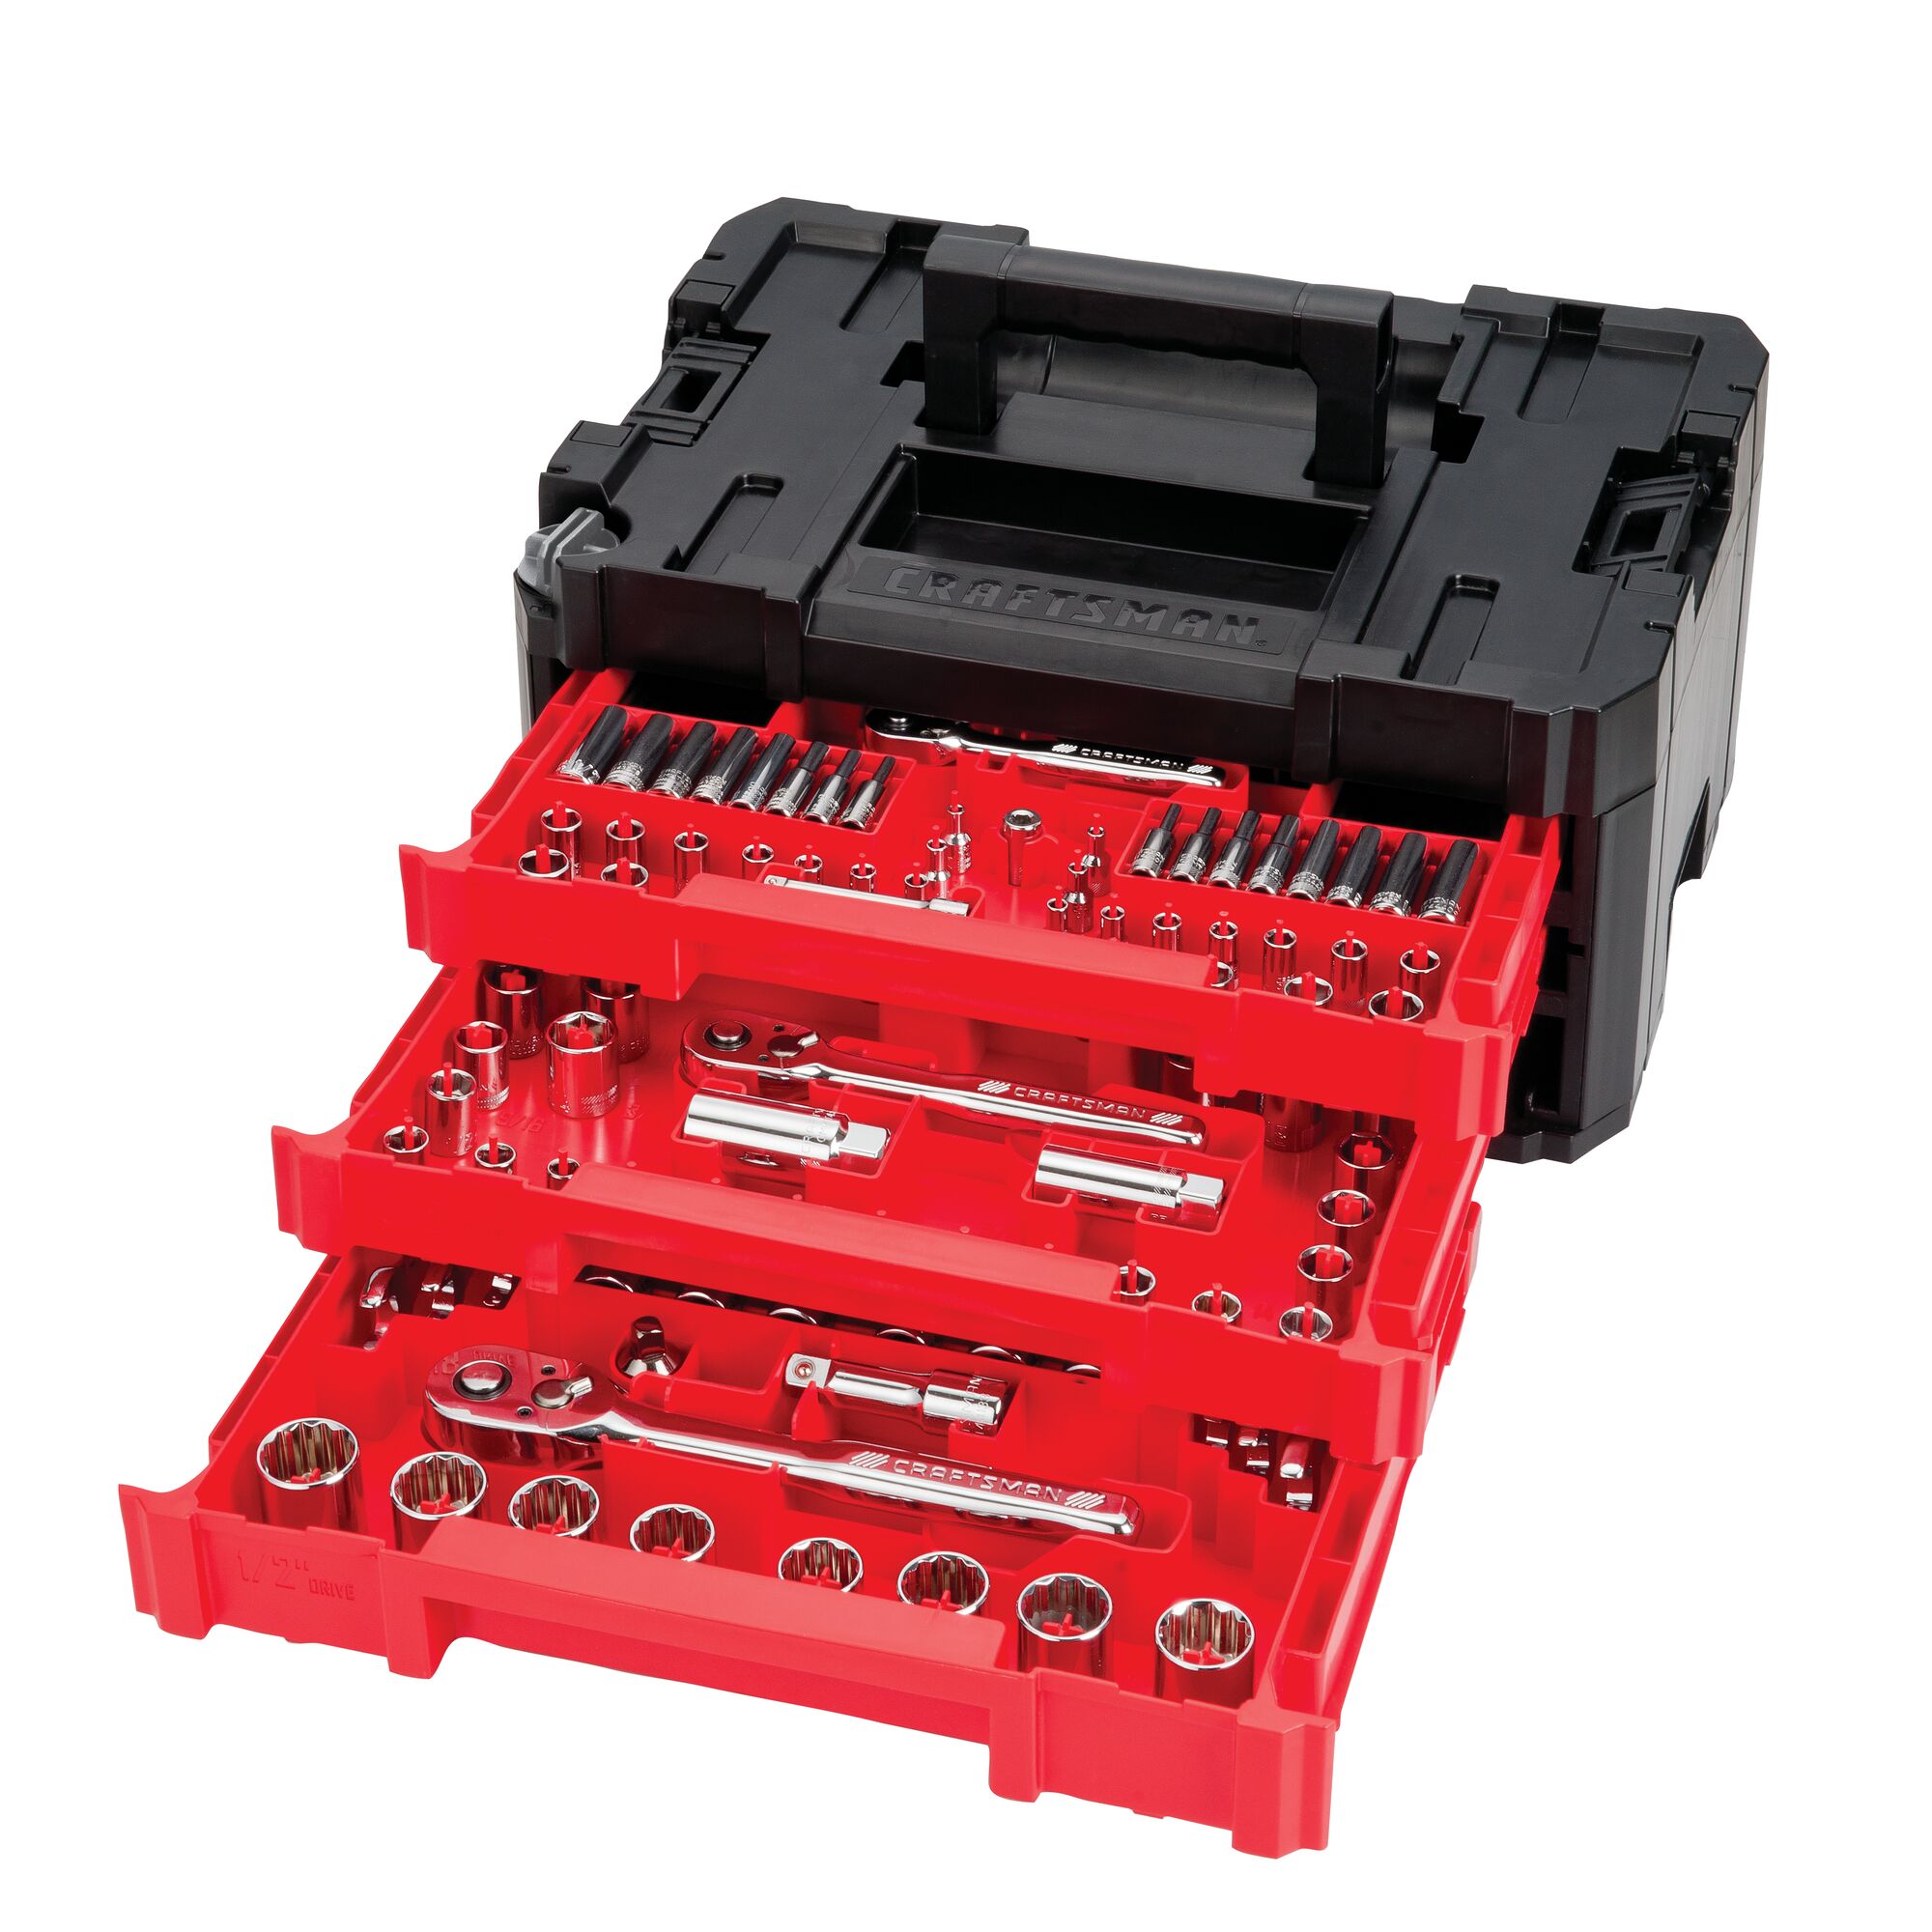 Layout of the contents of the CRAFTSMAN VERSASTACK 262 piece 3-Drawer Mechanic Tool Set.